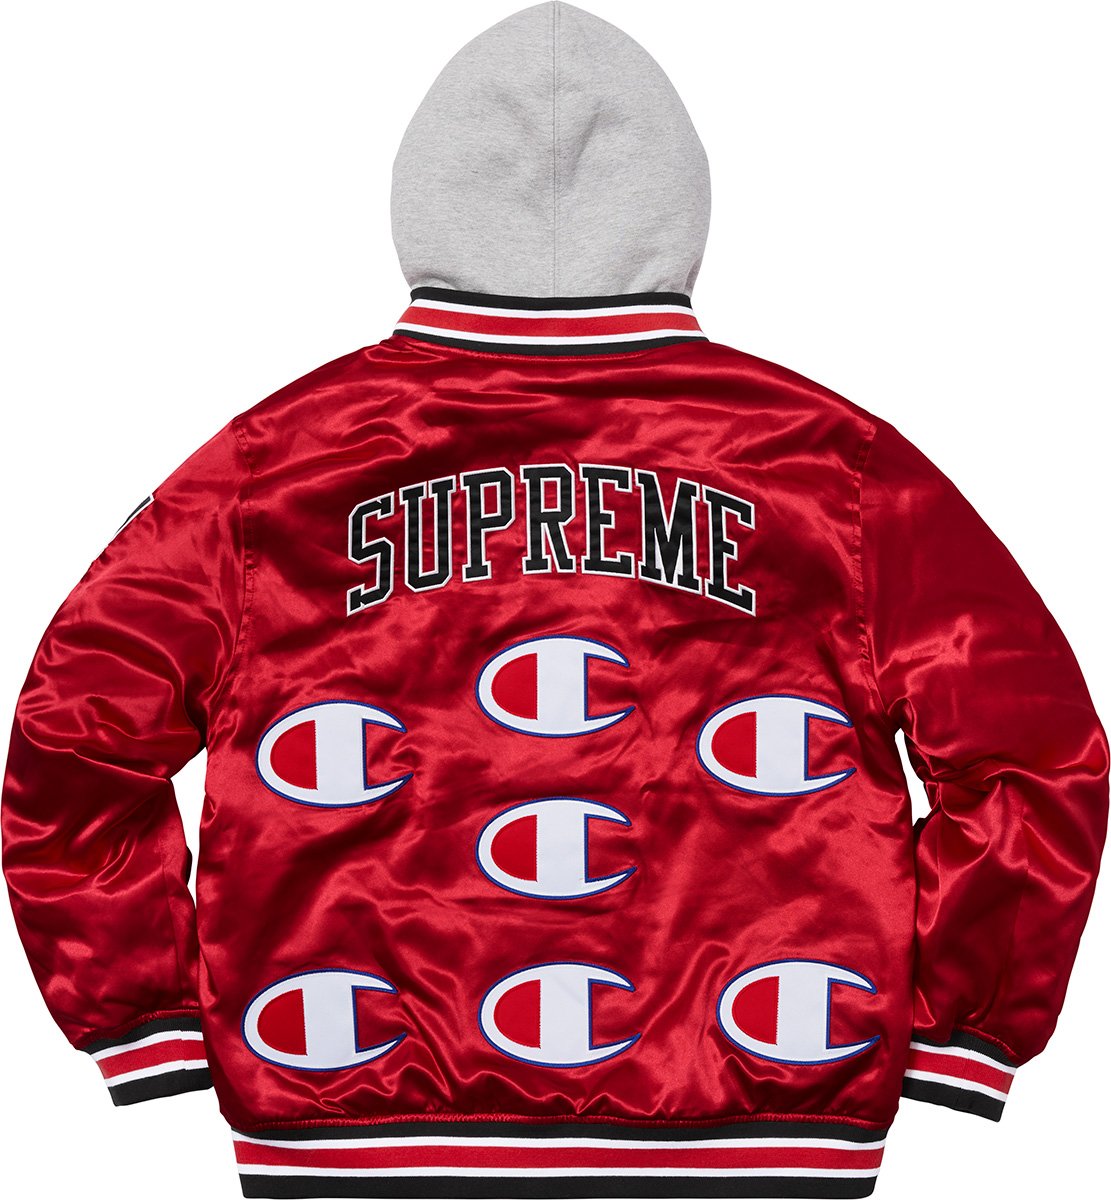 Champion And Supreme Jacket on Sale, UP TO 68% OFF | www.loop-cn.com